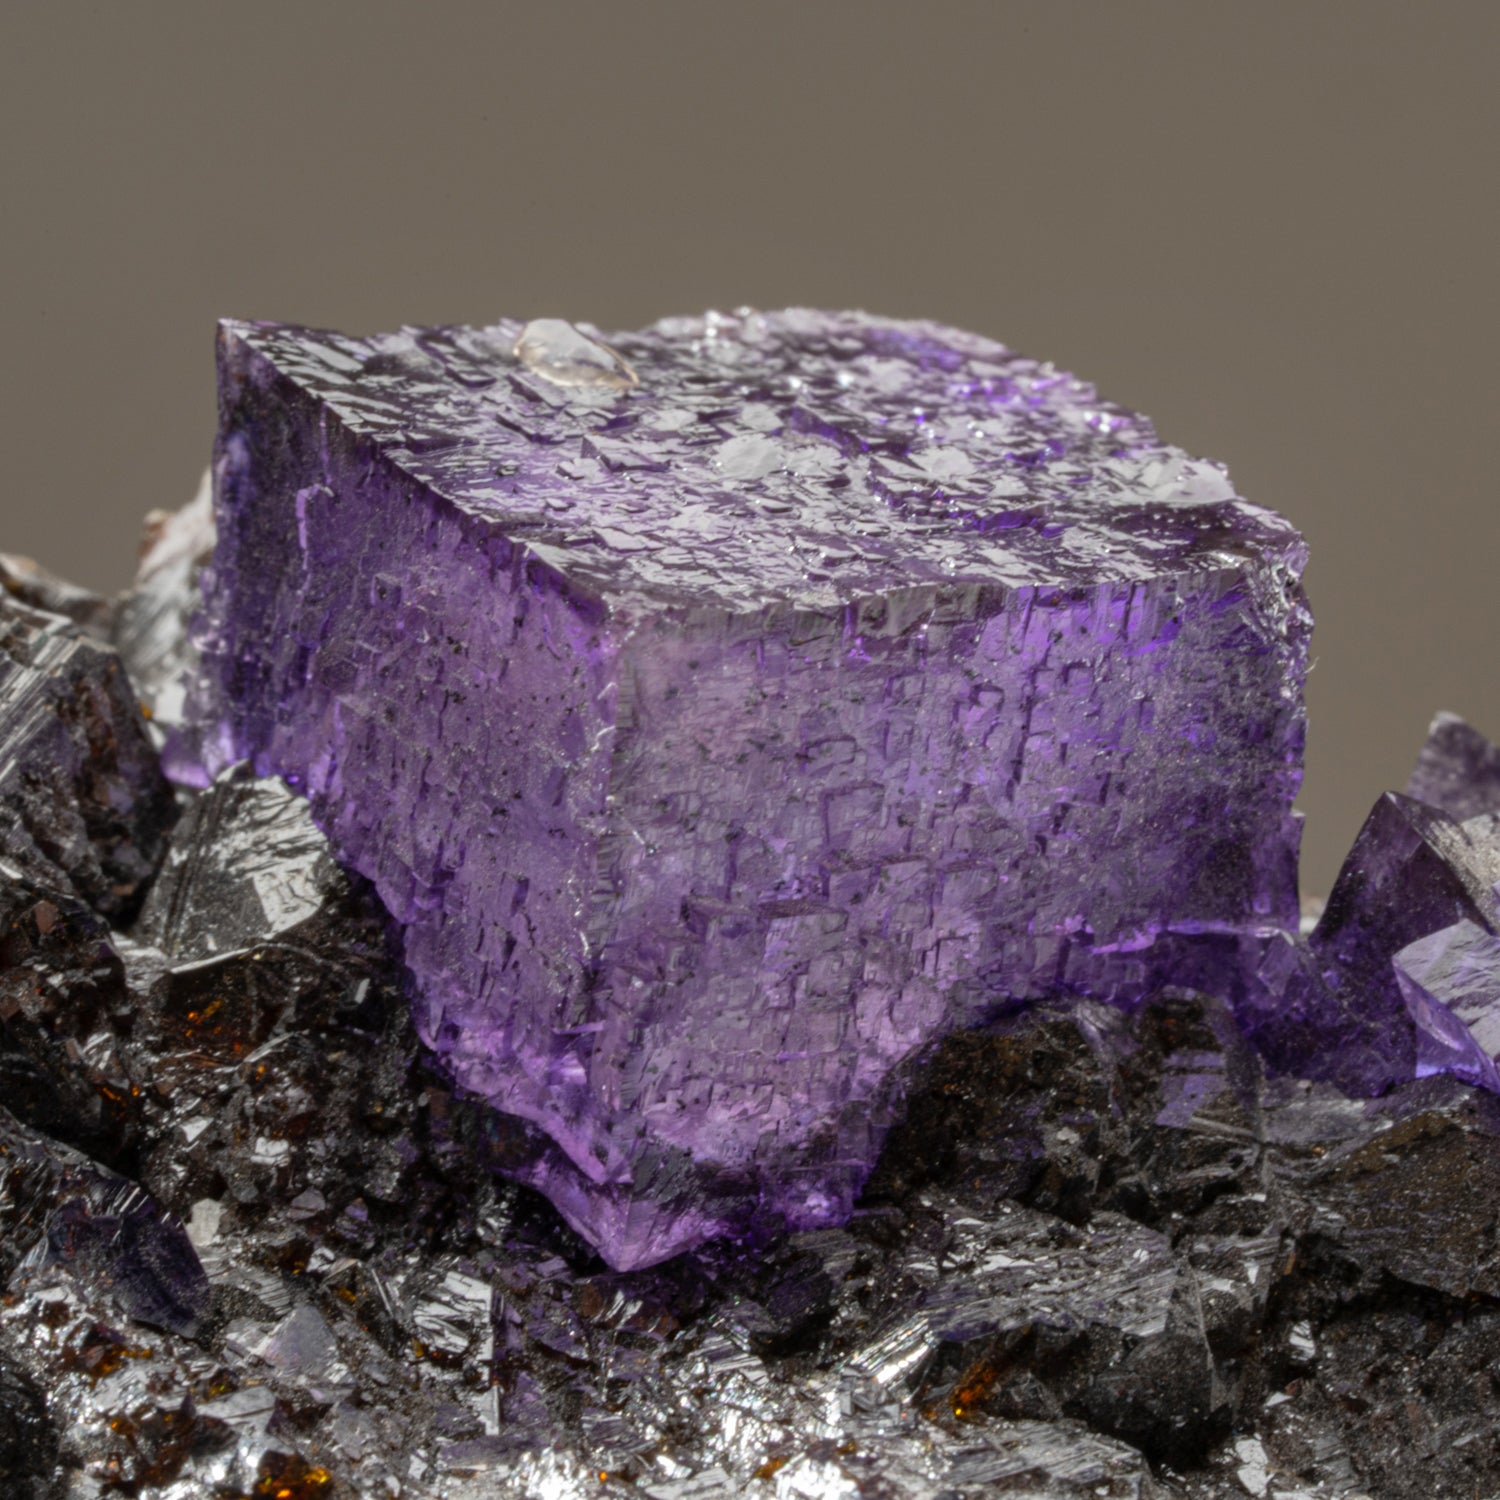 Purple Fluorite with Sphalerite on Barite from Elmwood Mine, Carthage. Smith County, Tennessee